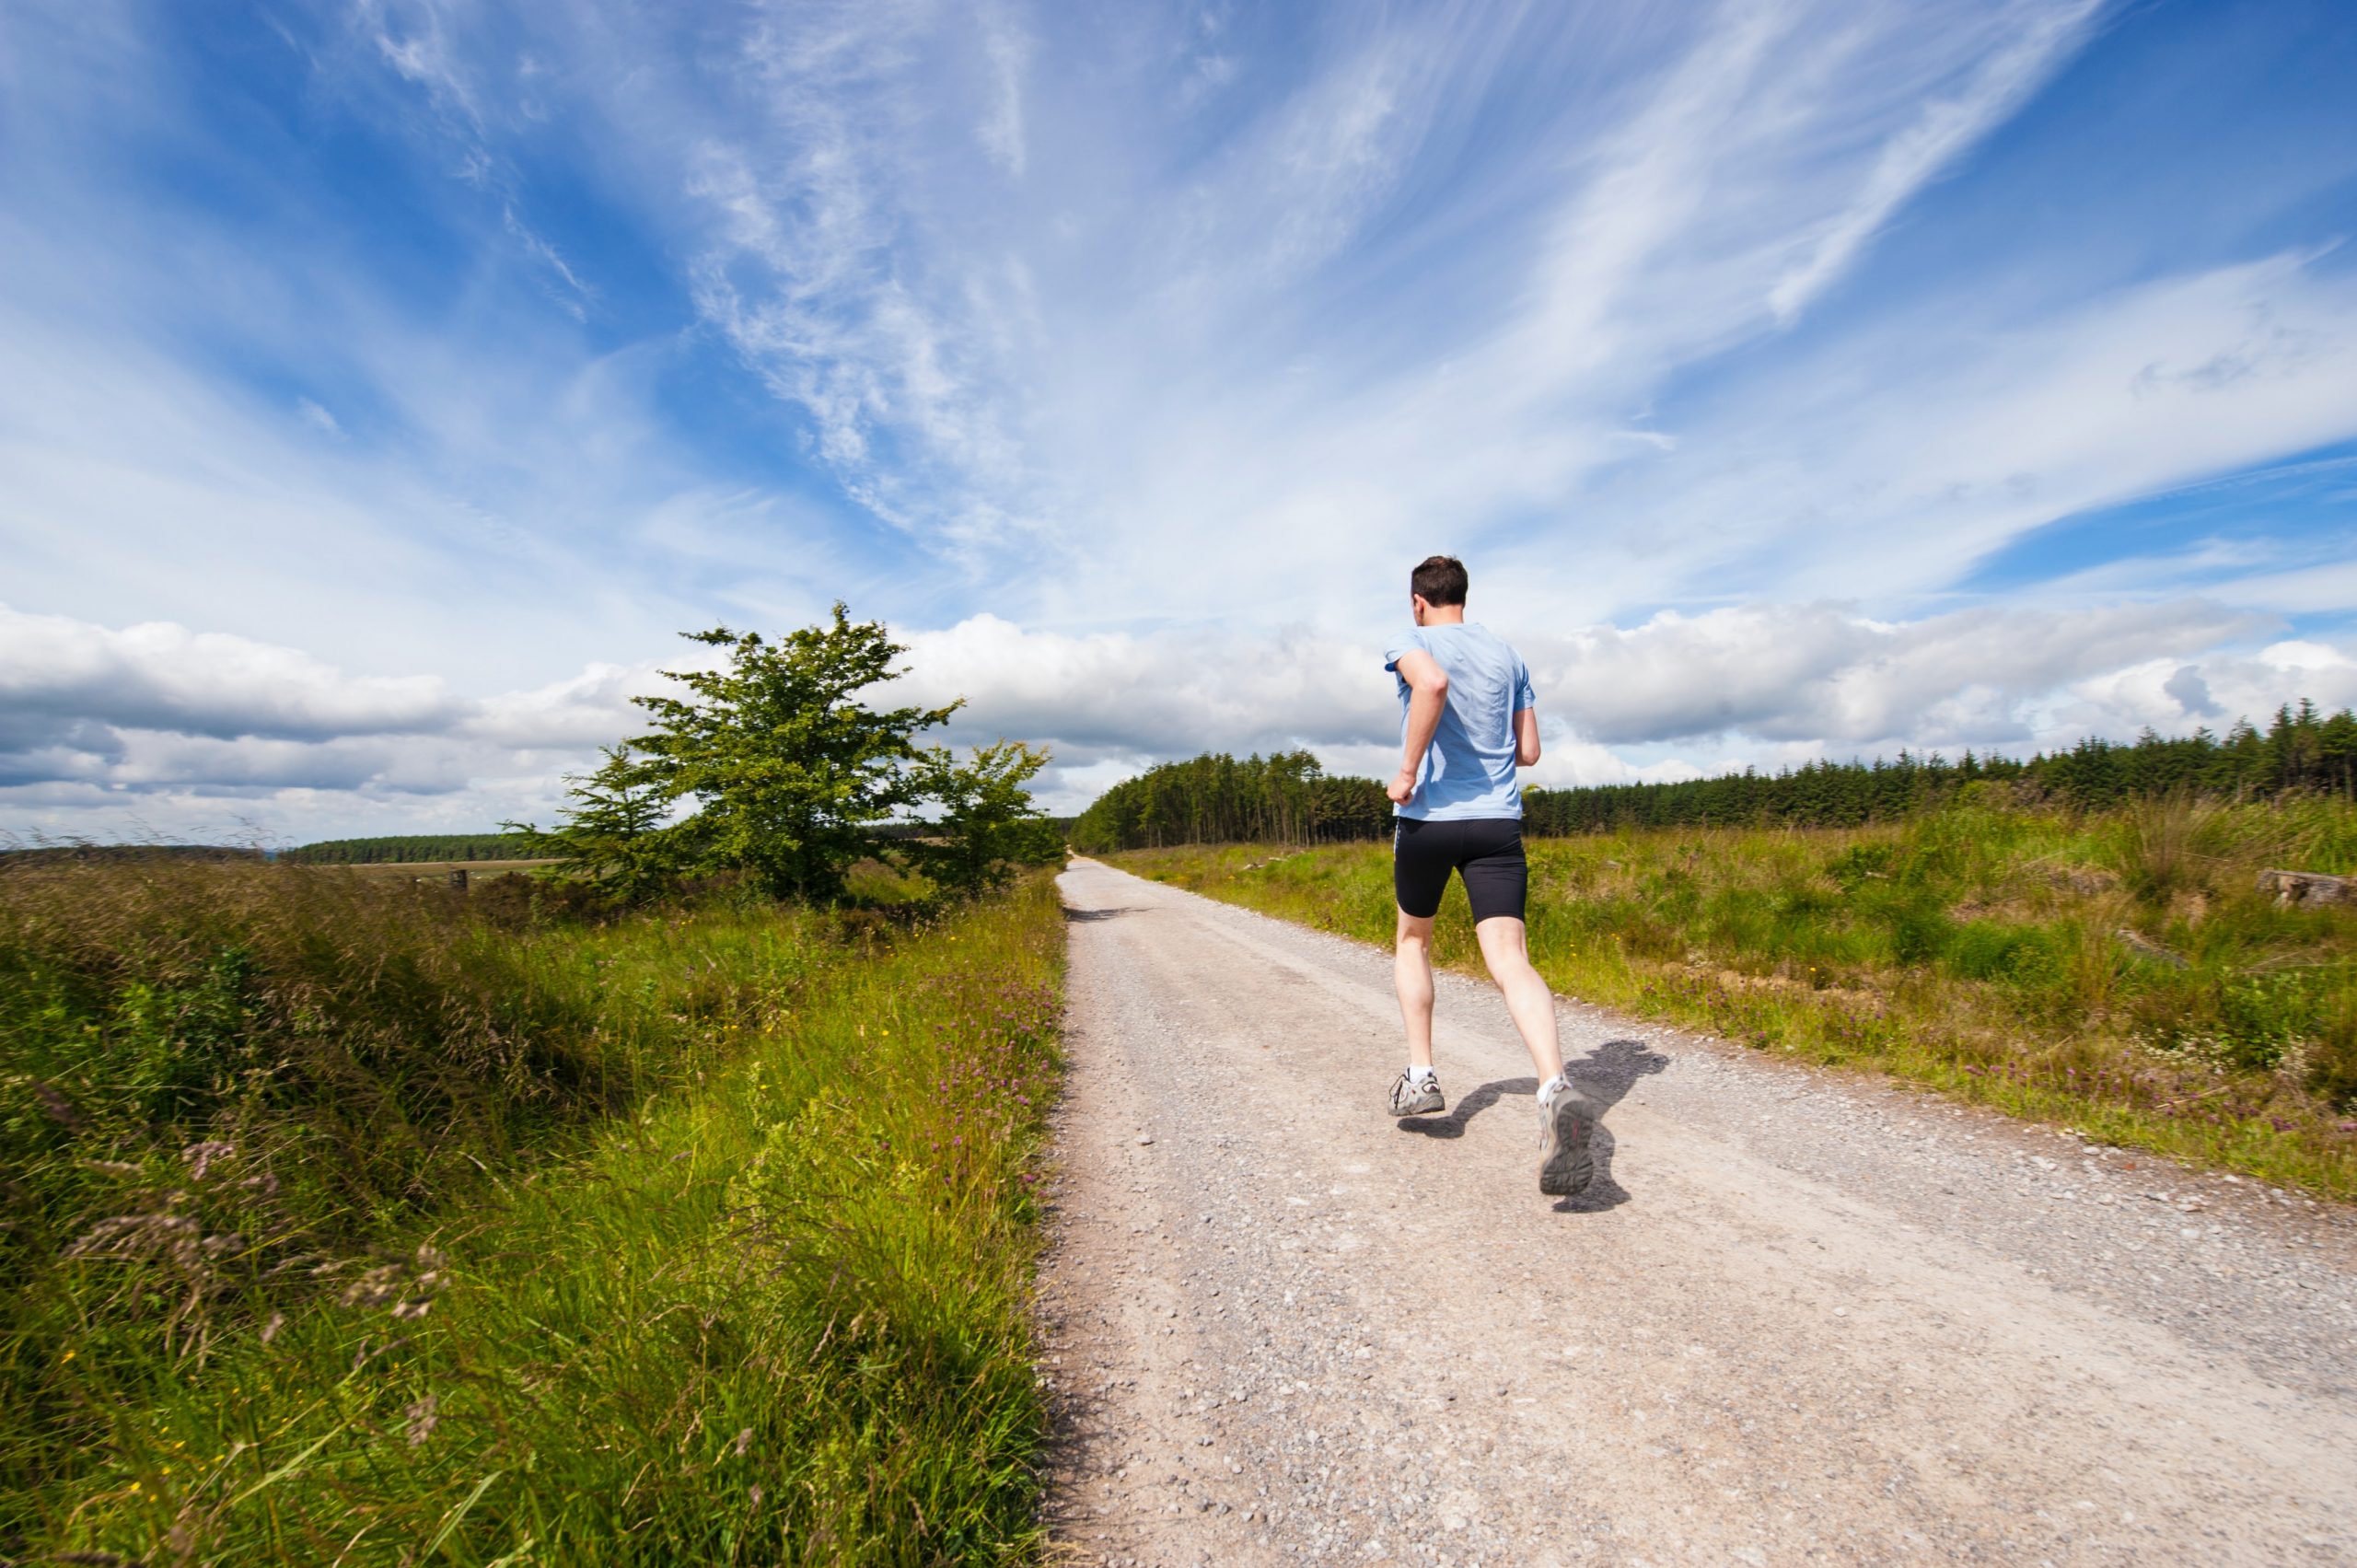 rear view of man running along rural road, blue sky and greenery